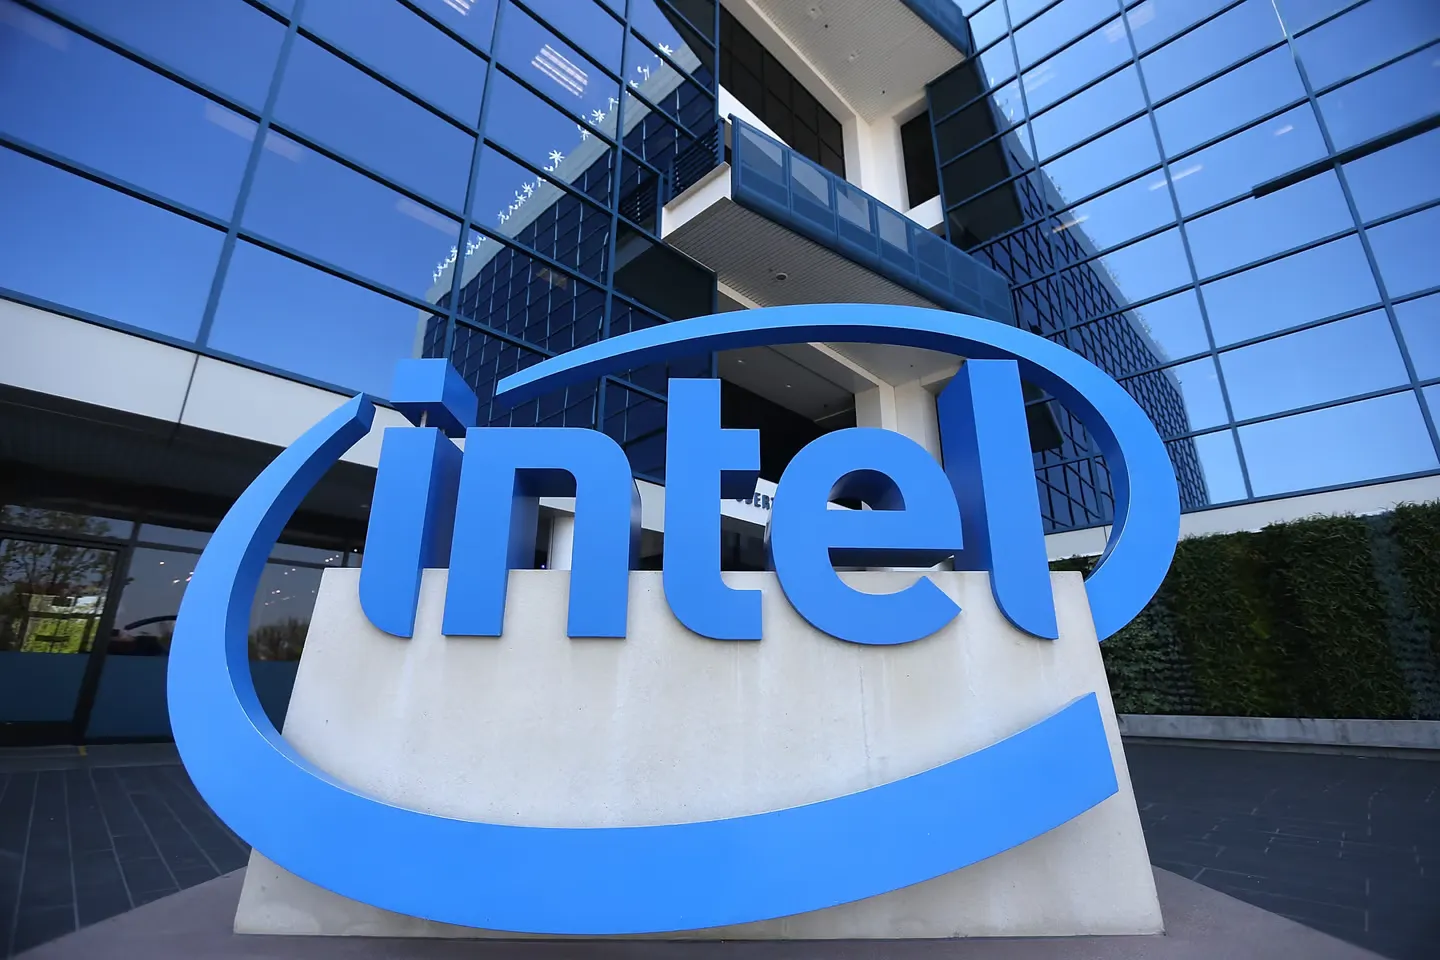 Intel backs out of planned construction start date for chip plant in Germany